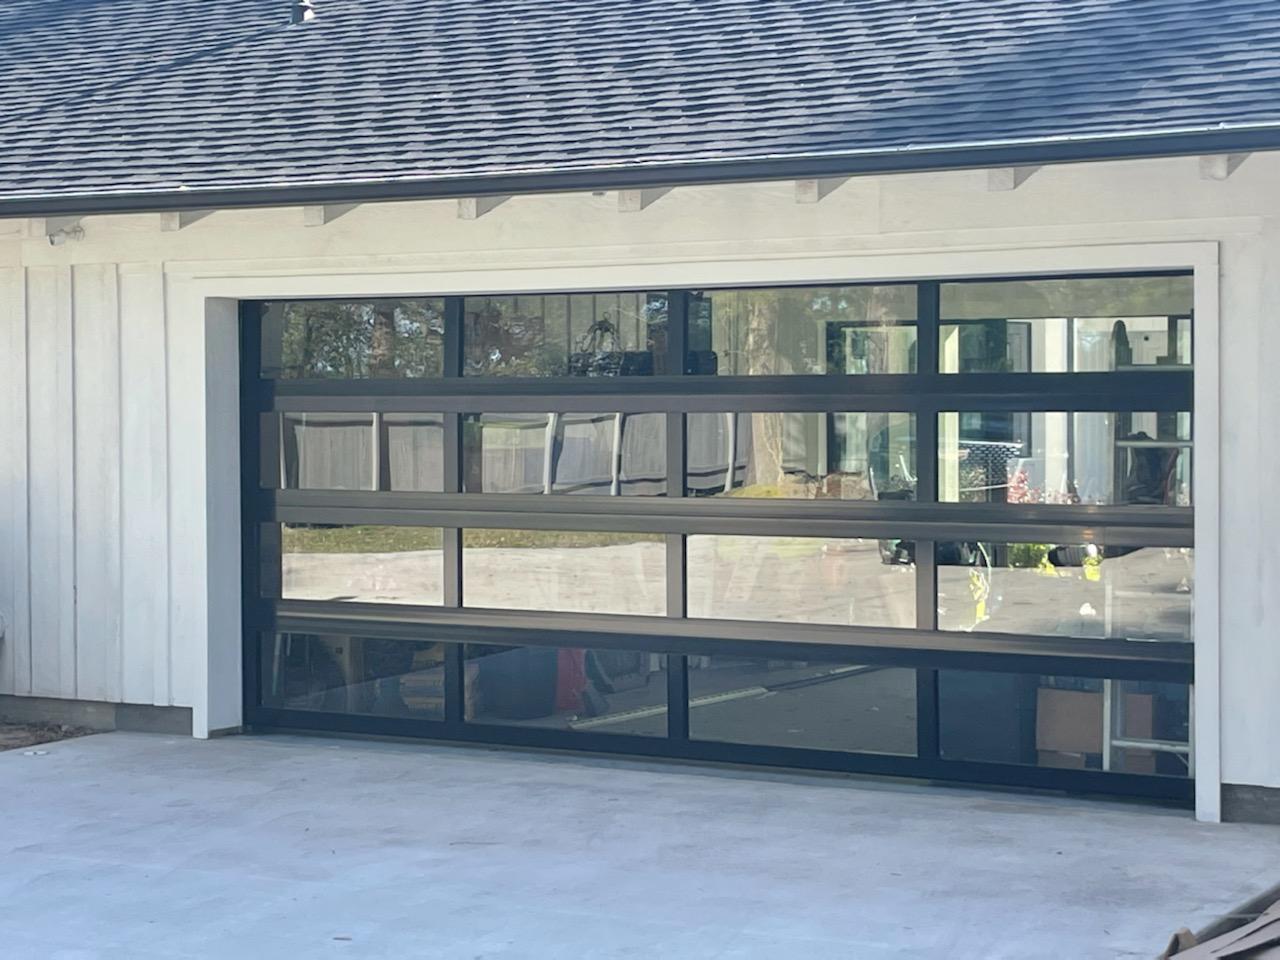 16 FT Wide By 8 FT Tall Full View Garage Door Matt Black Finish With Clear Glass